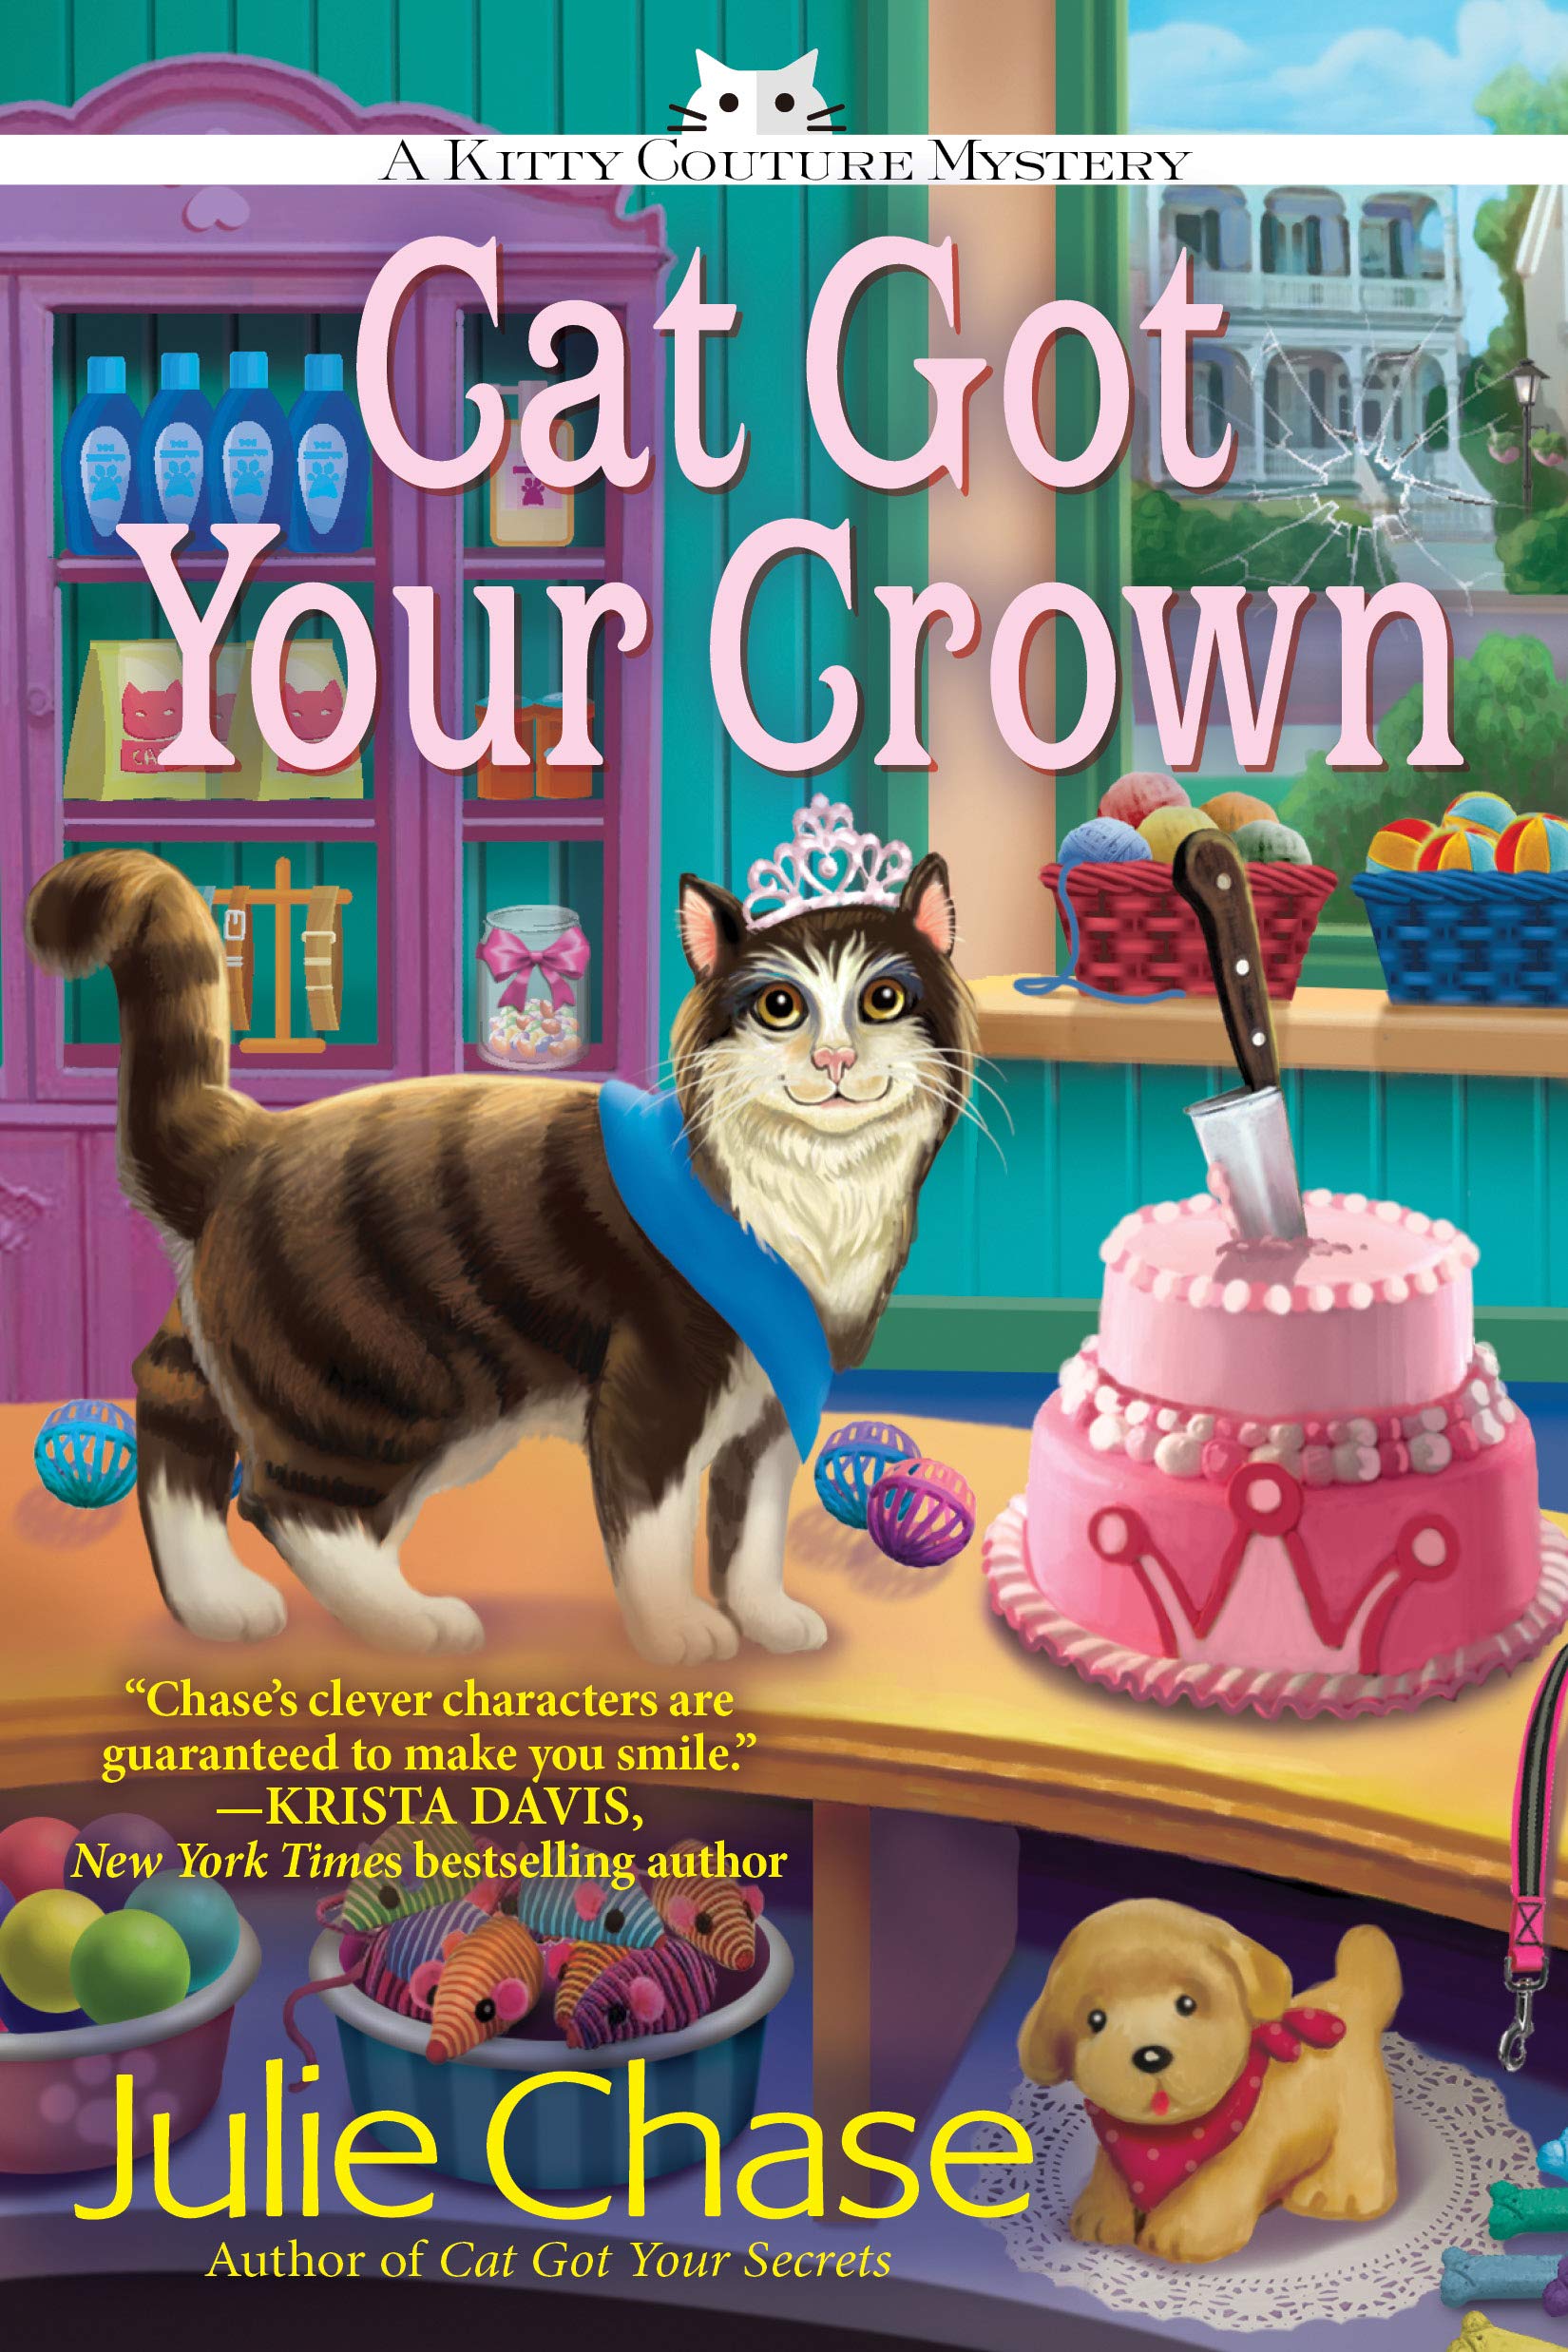 Cat Got Your Crown: A Kitty Couture Mystery (Kitty Couture Mysteries)